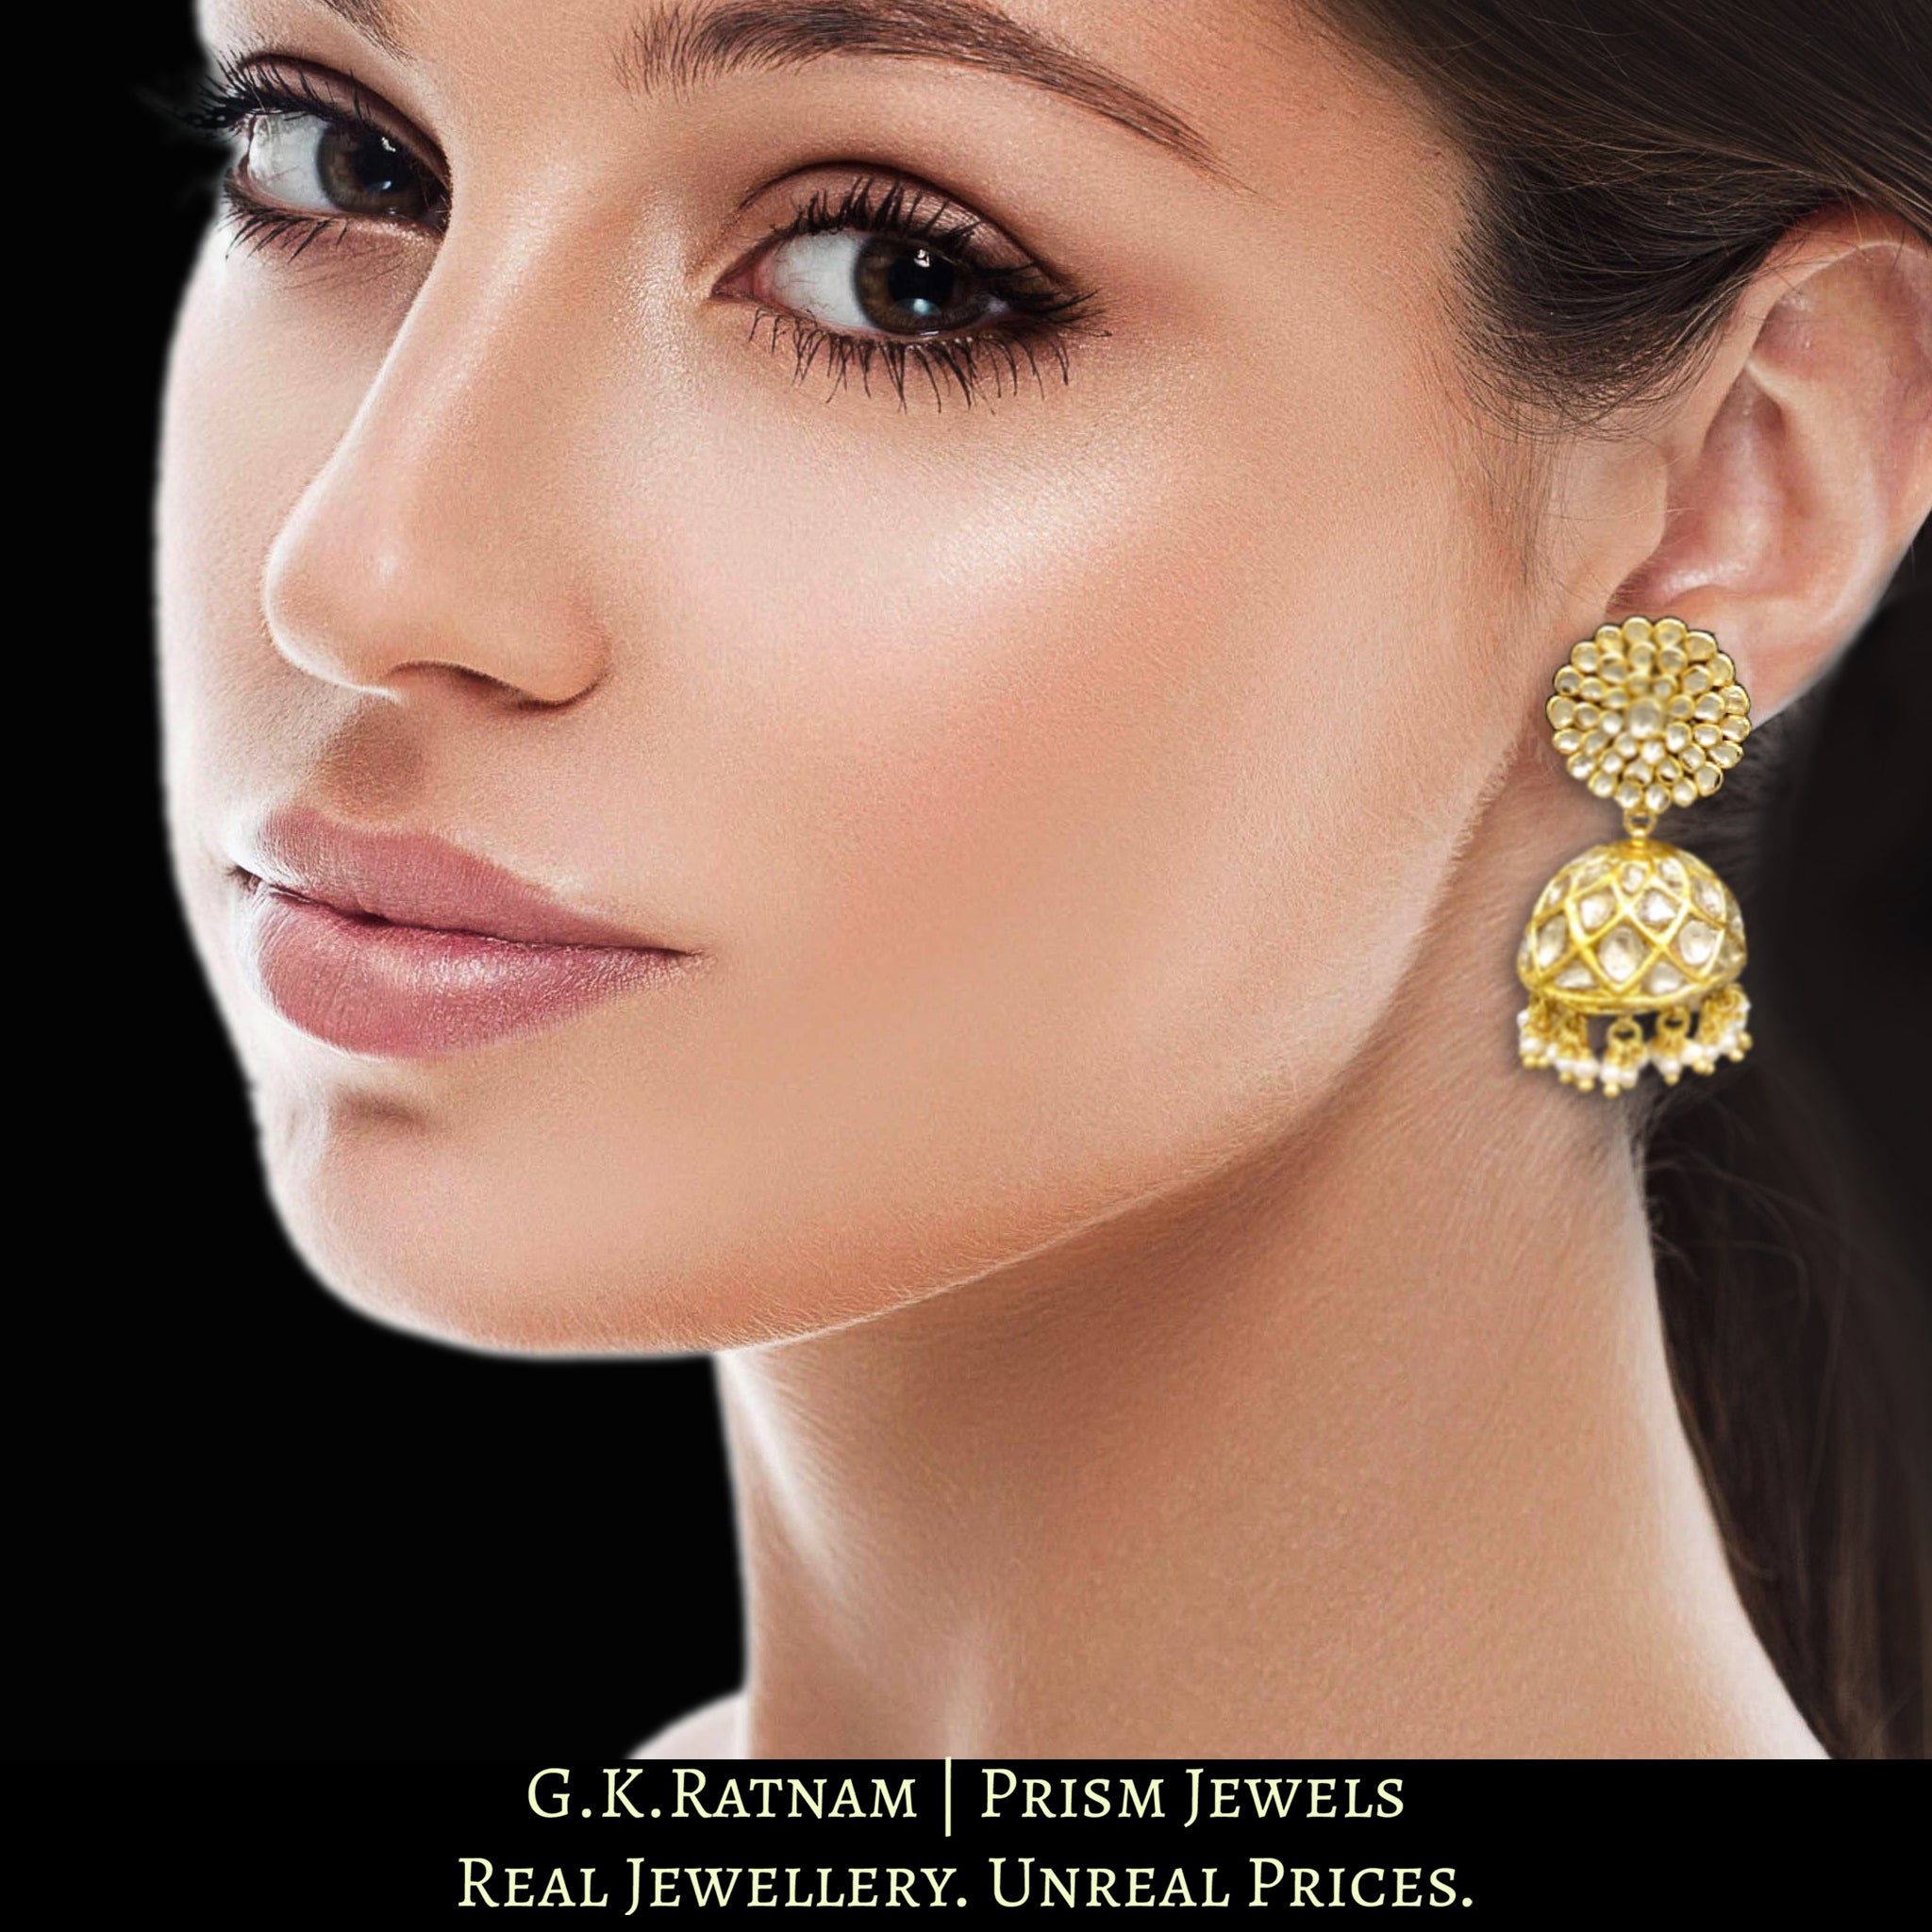 23k Gold and Diamond Polki Jhumki Earring Pair with natural freshwater pearls